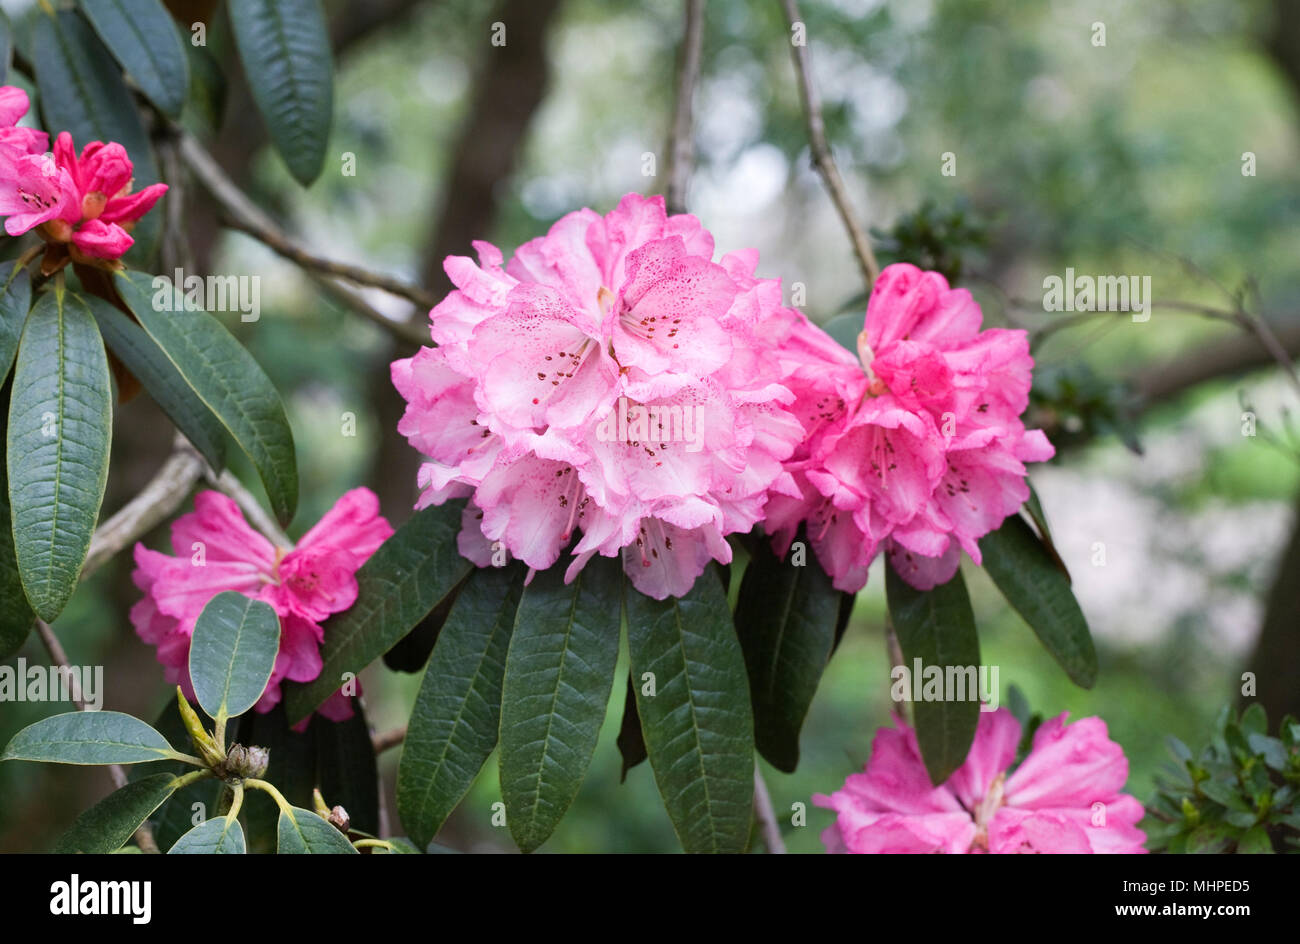 Rhododendron taliense flowers. Stock Photo